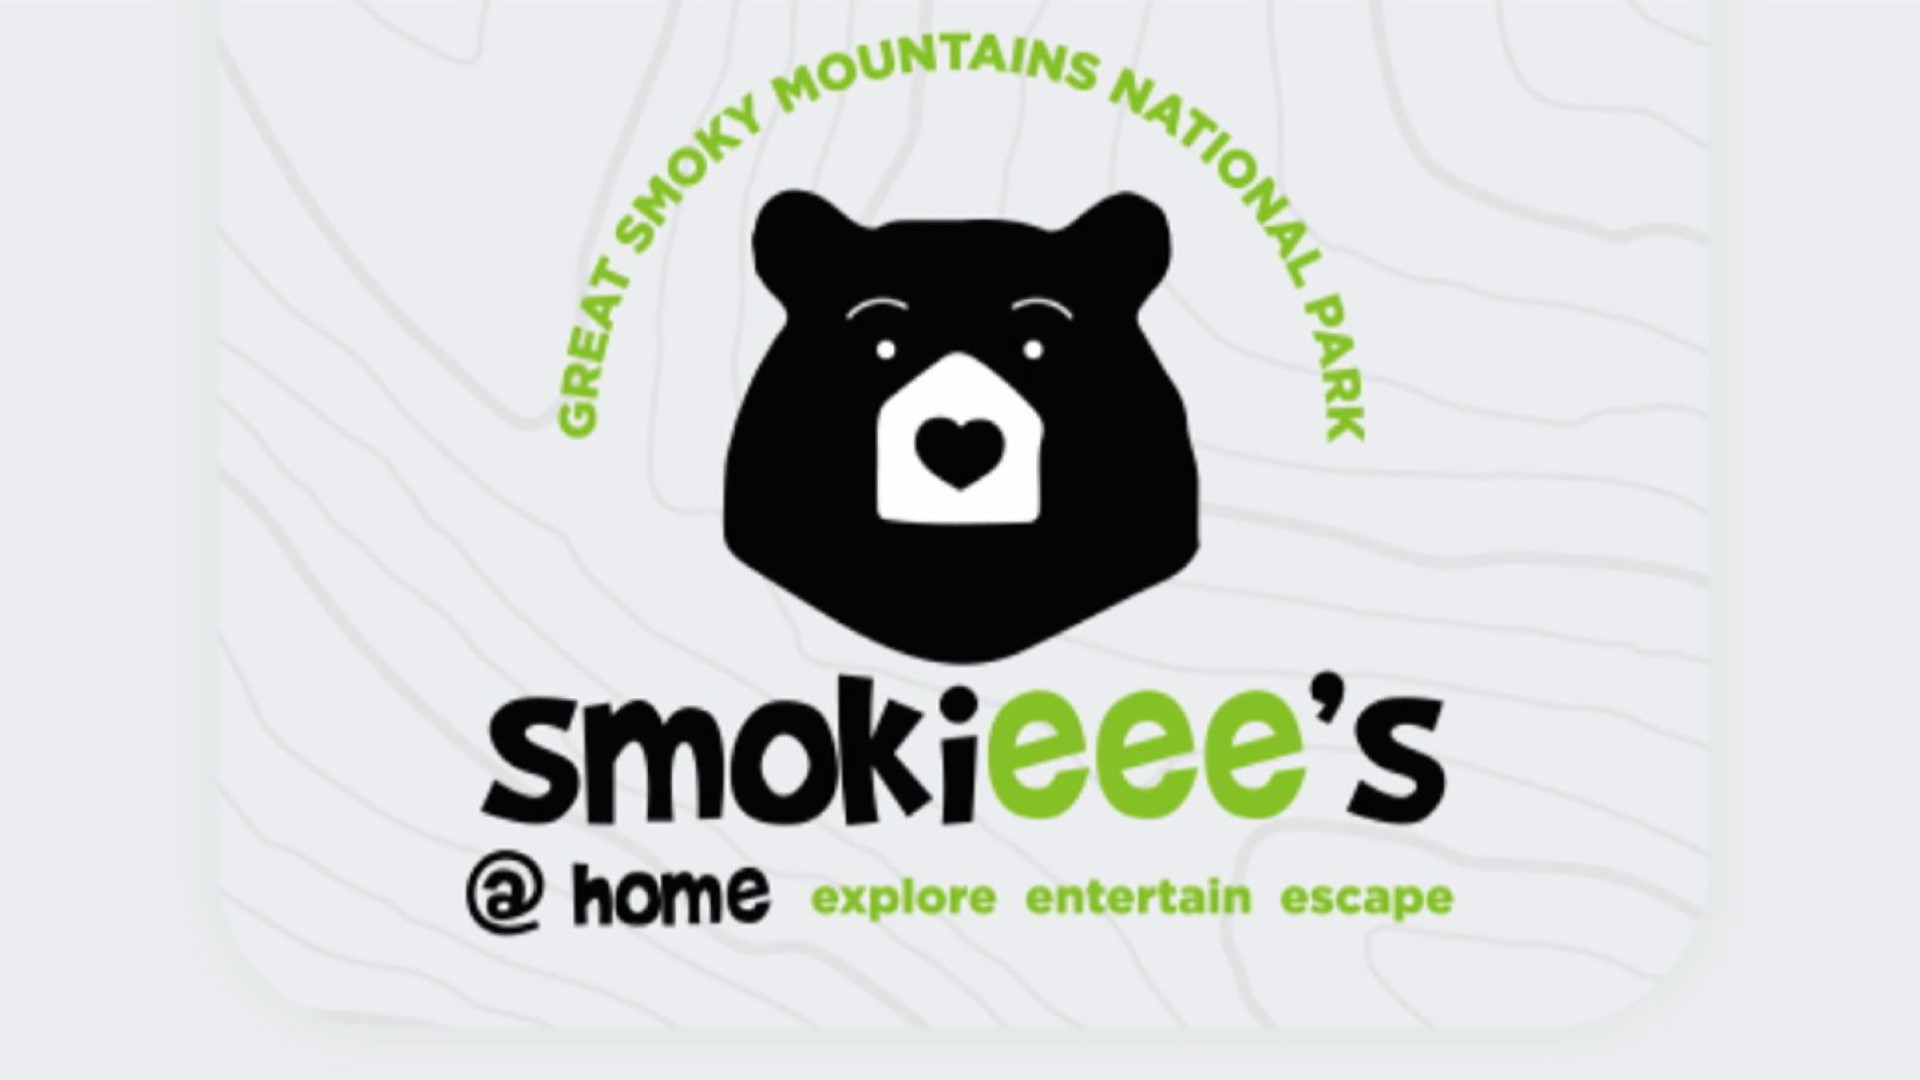 Educational groups headquartered in the park are unable to bring people to the Smokies due to COVID-19 precautions. So, they're bringing the SmokiEEEs to you online.